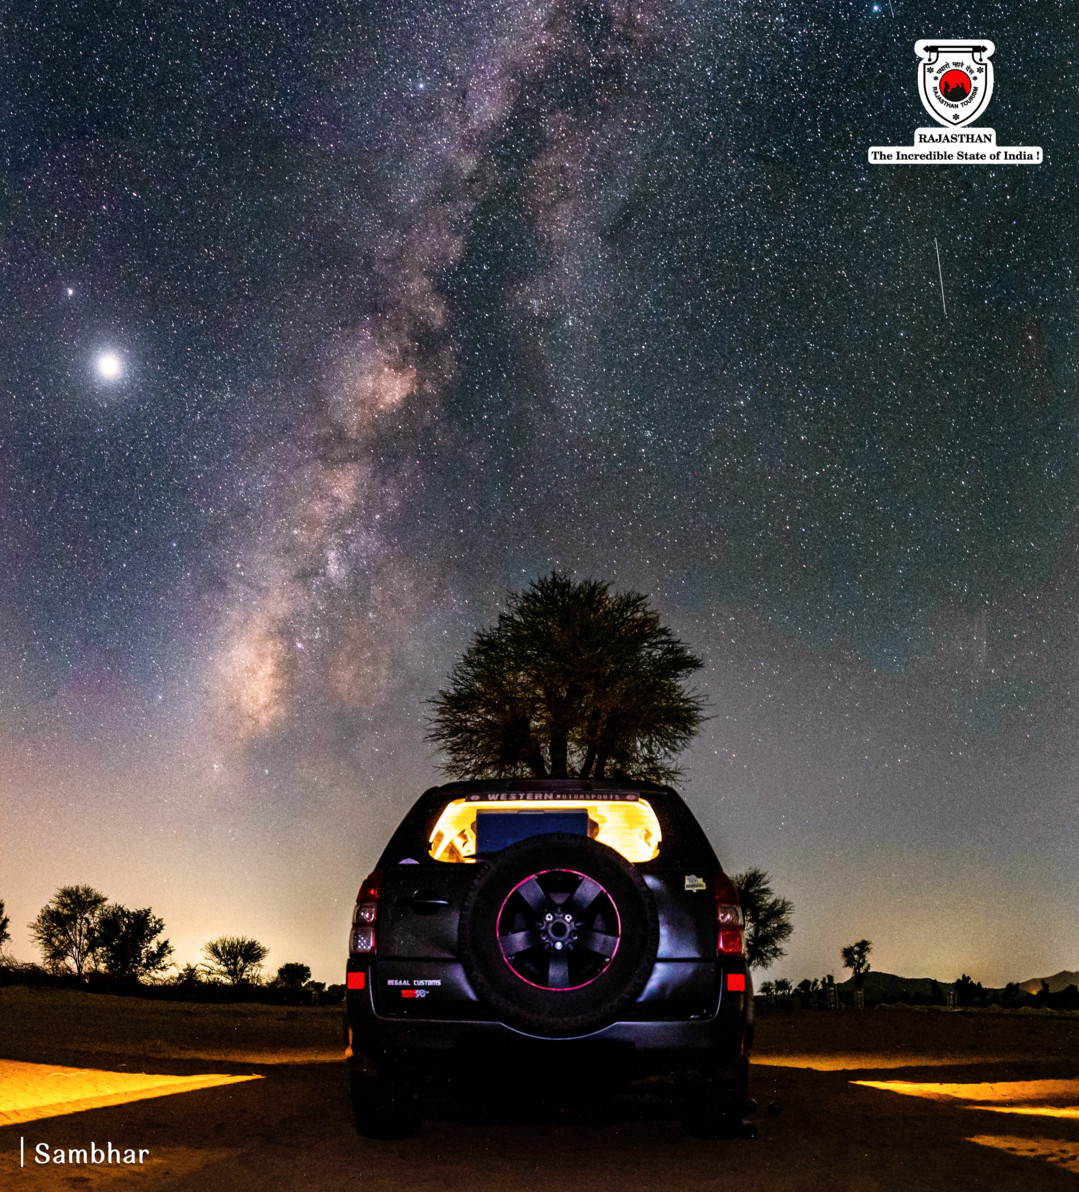 Sambhar is at its most beautiful at night when the serene silence of nature fill the air..!!
Experience Star Gazing activity during the Sambhar Festival..!!
February 17th-19th, 2023

#astrotourism #sambhar #travelrajasthan #padharomharedes #rajasthantourism #rajasthan